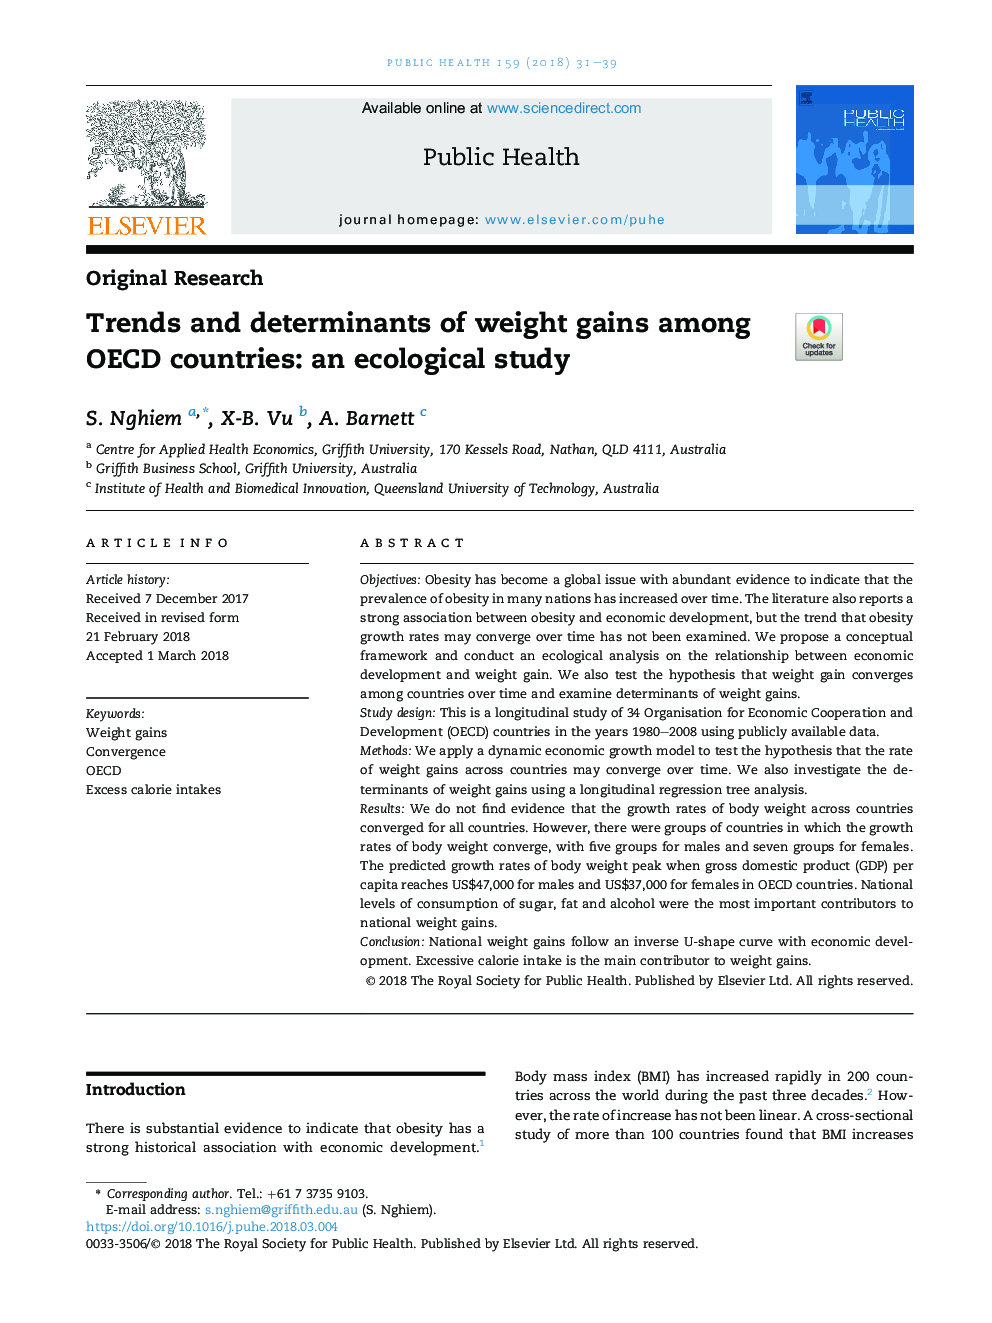 Trends and determinants of weight gains among OECD countries: an ecological study